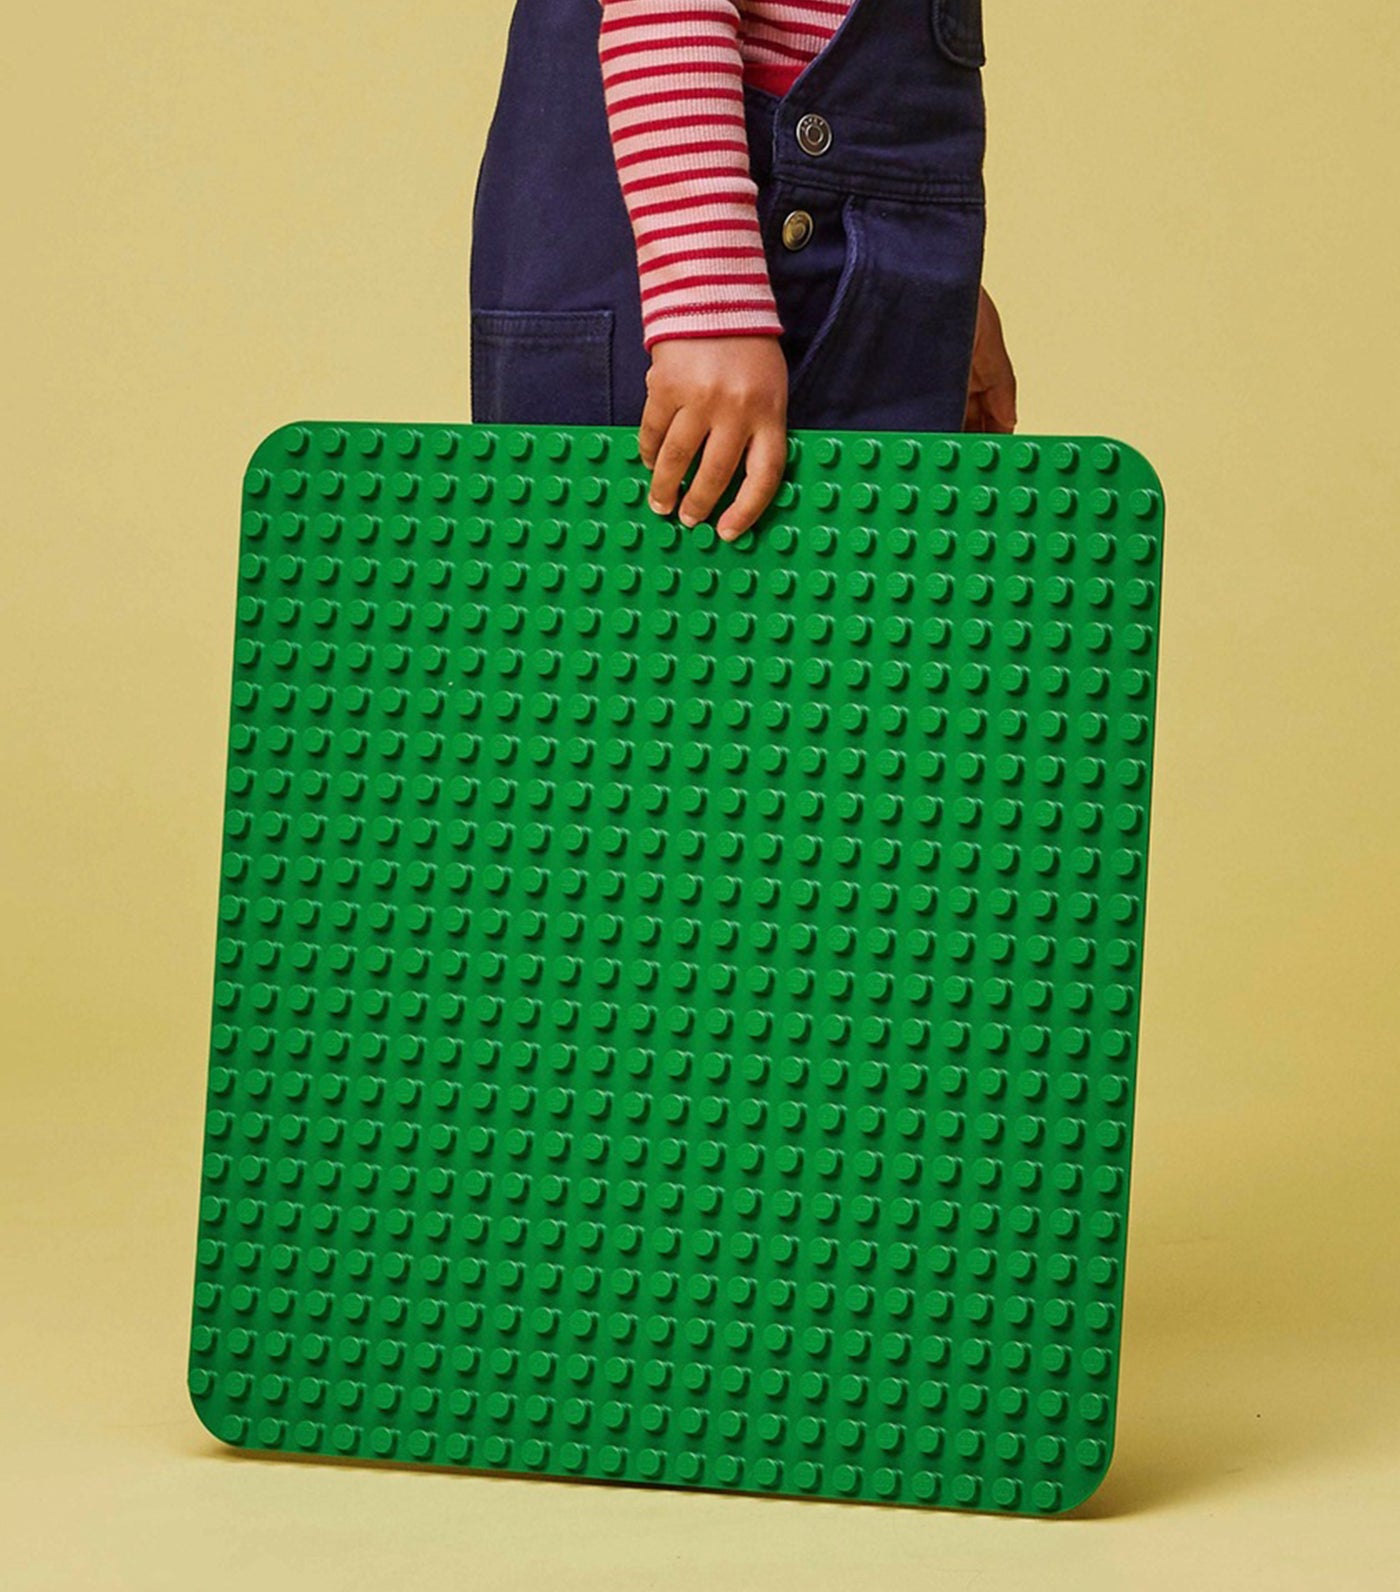 DUPLO® Green Building Plate